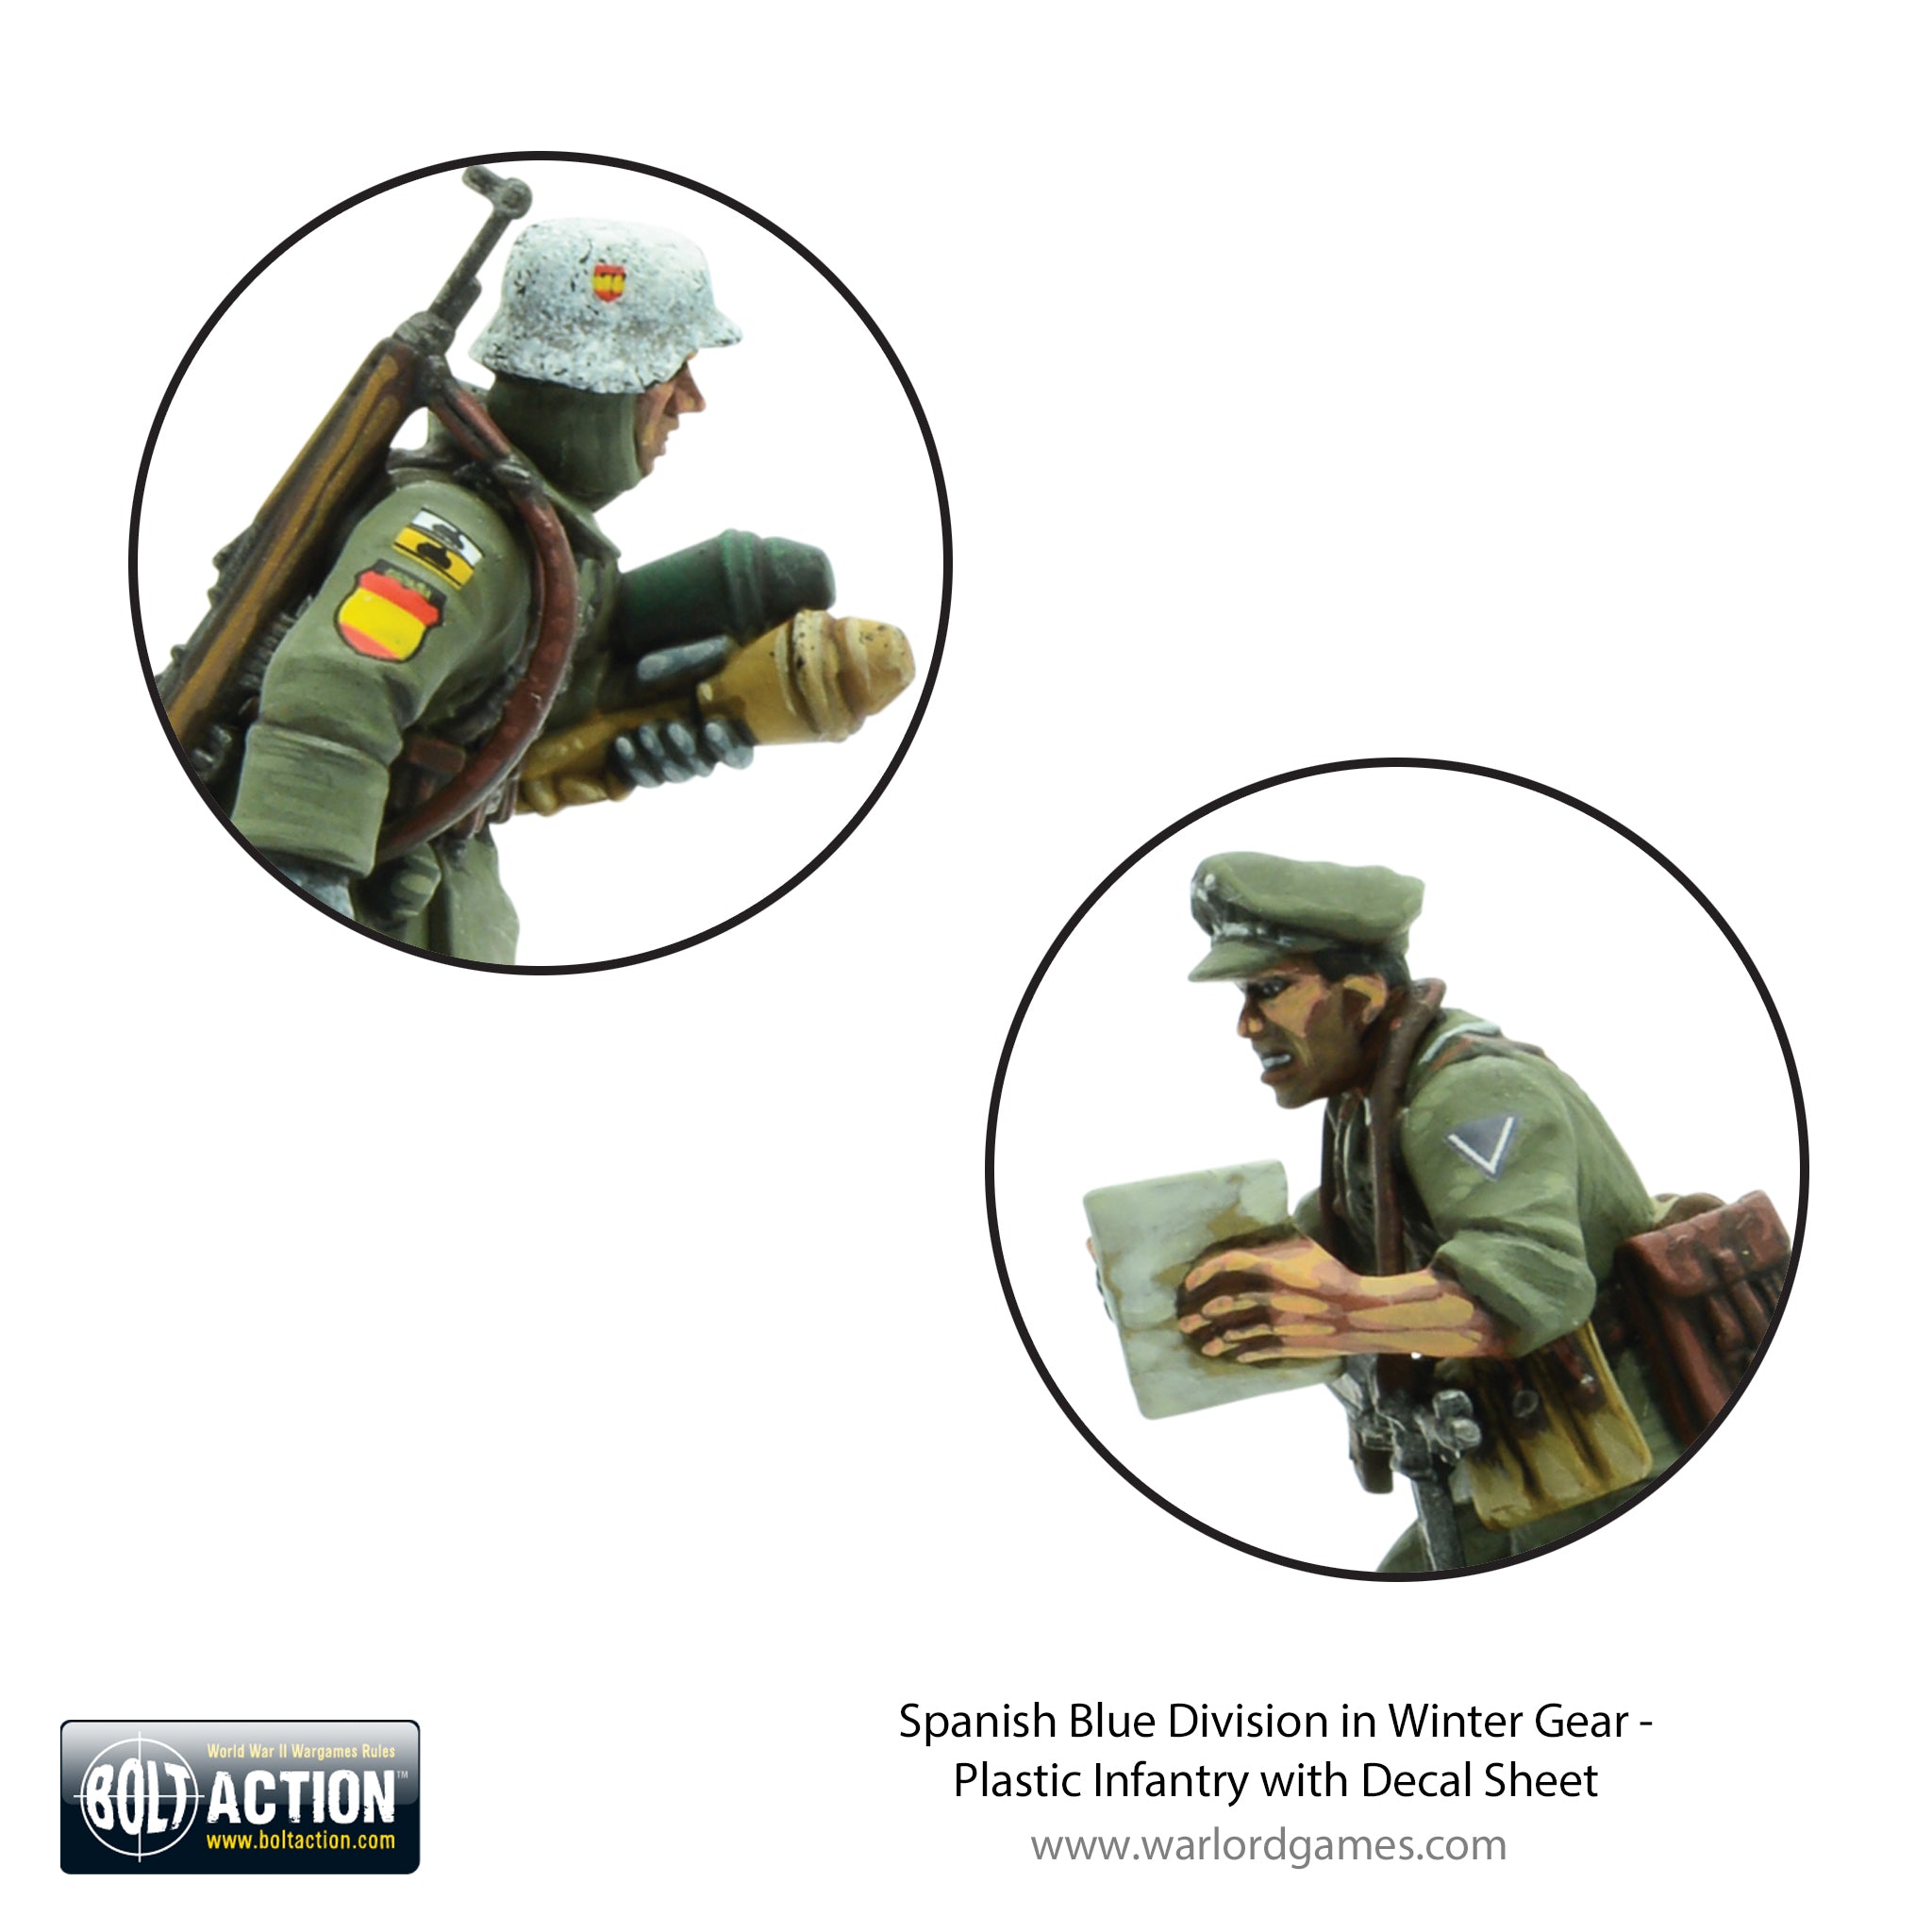 Spanish Blue Division in Winter Gear - Plastic Infantry with Decal Sheet